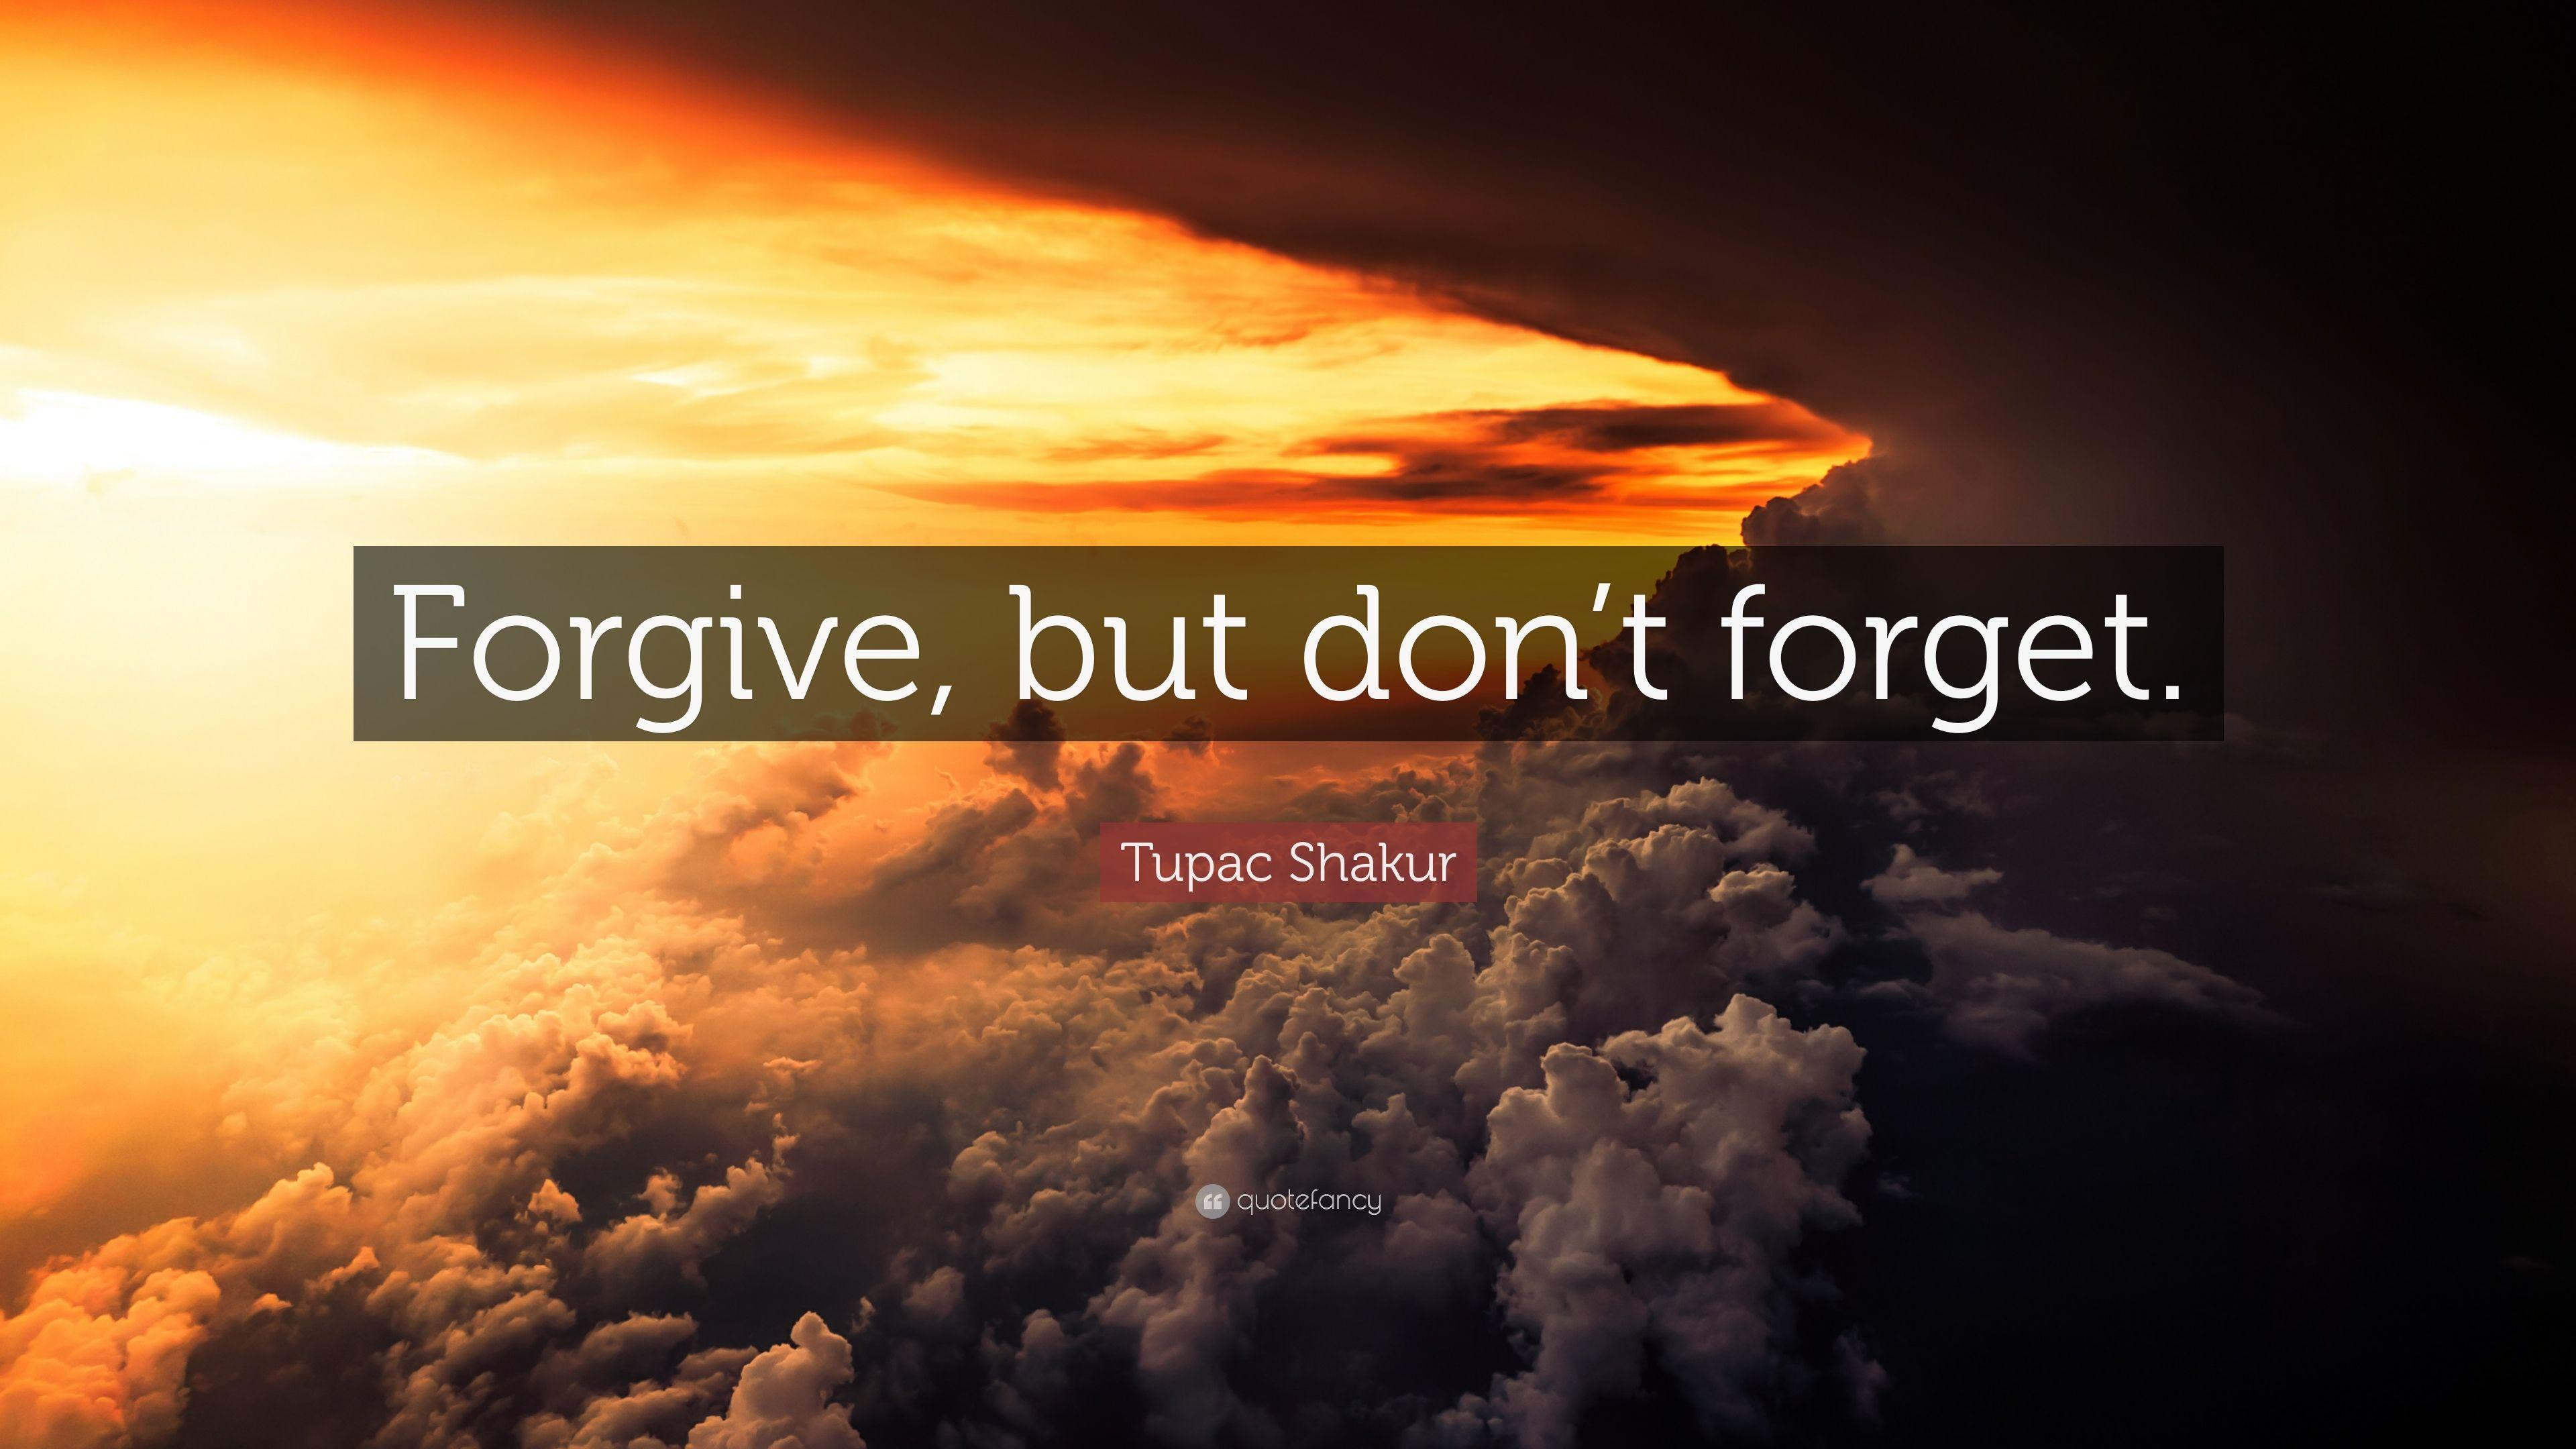 Tupac Shakur Quote: “Forgive, but don't forget.” 12 wallpaper